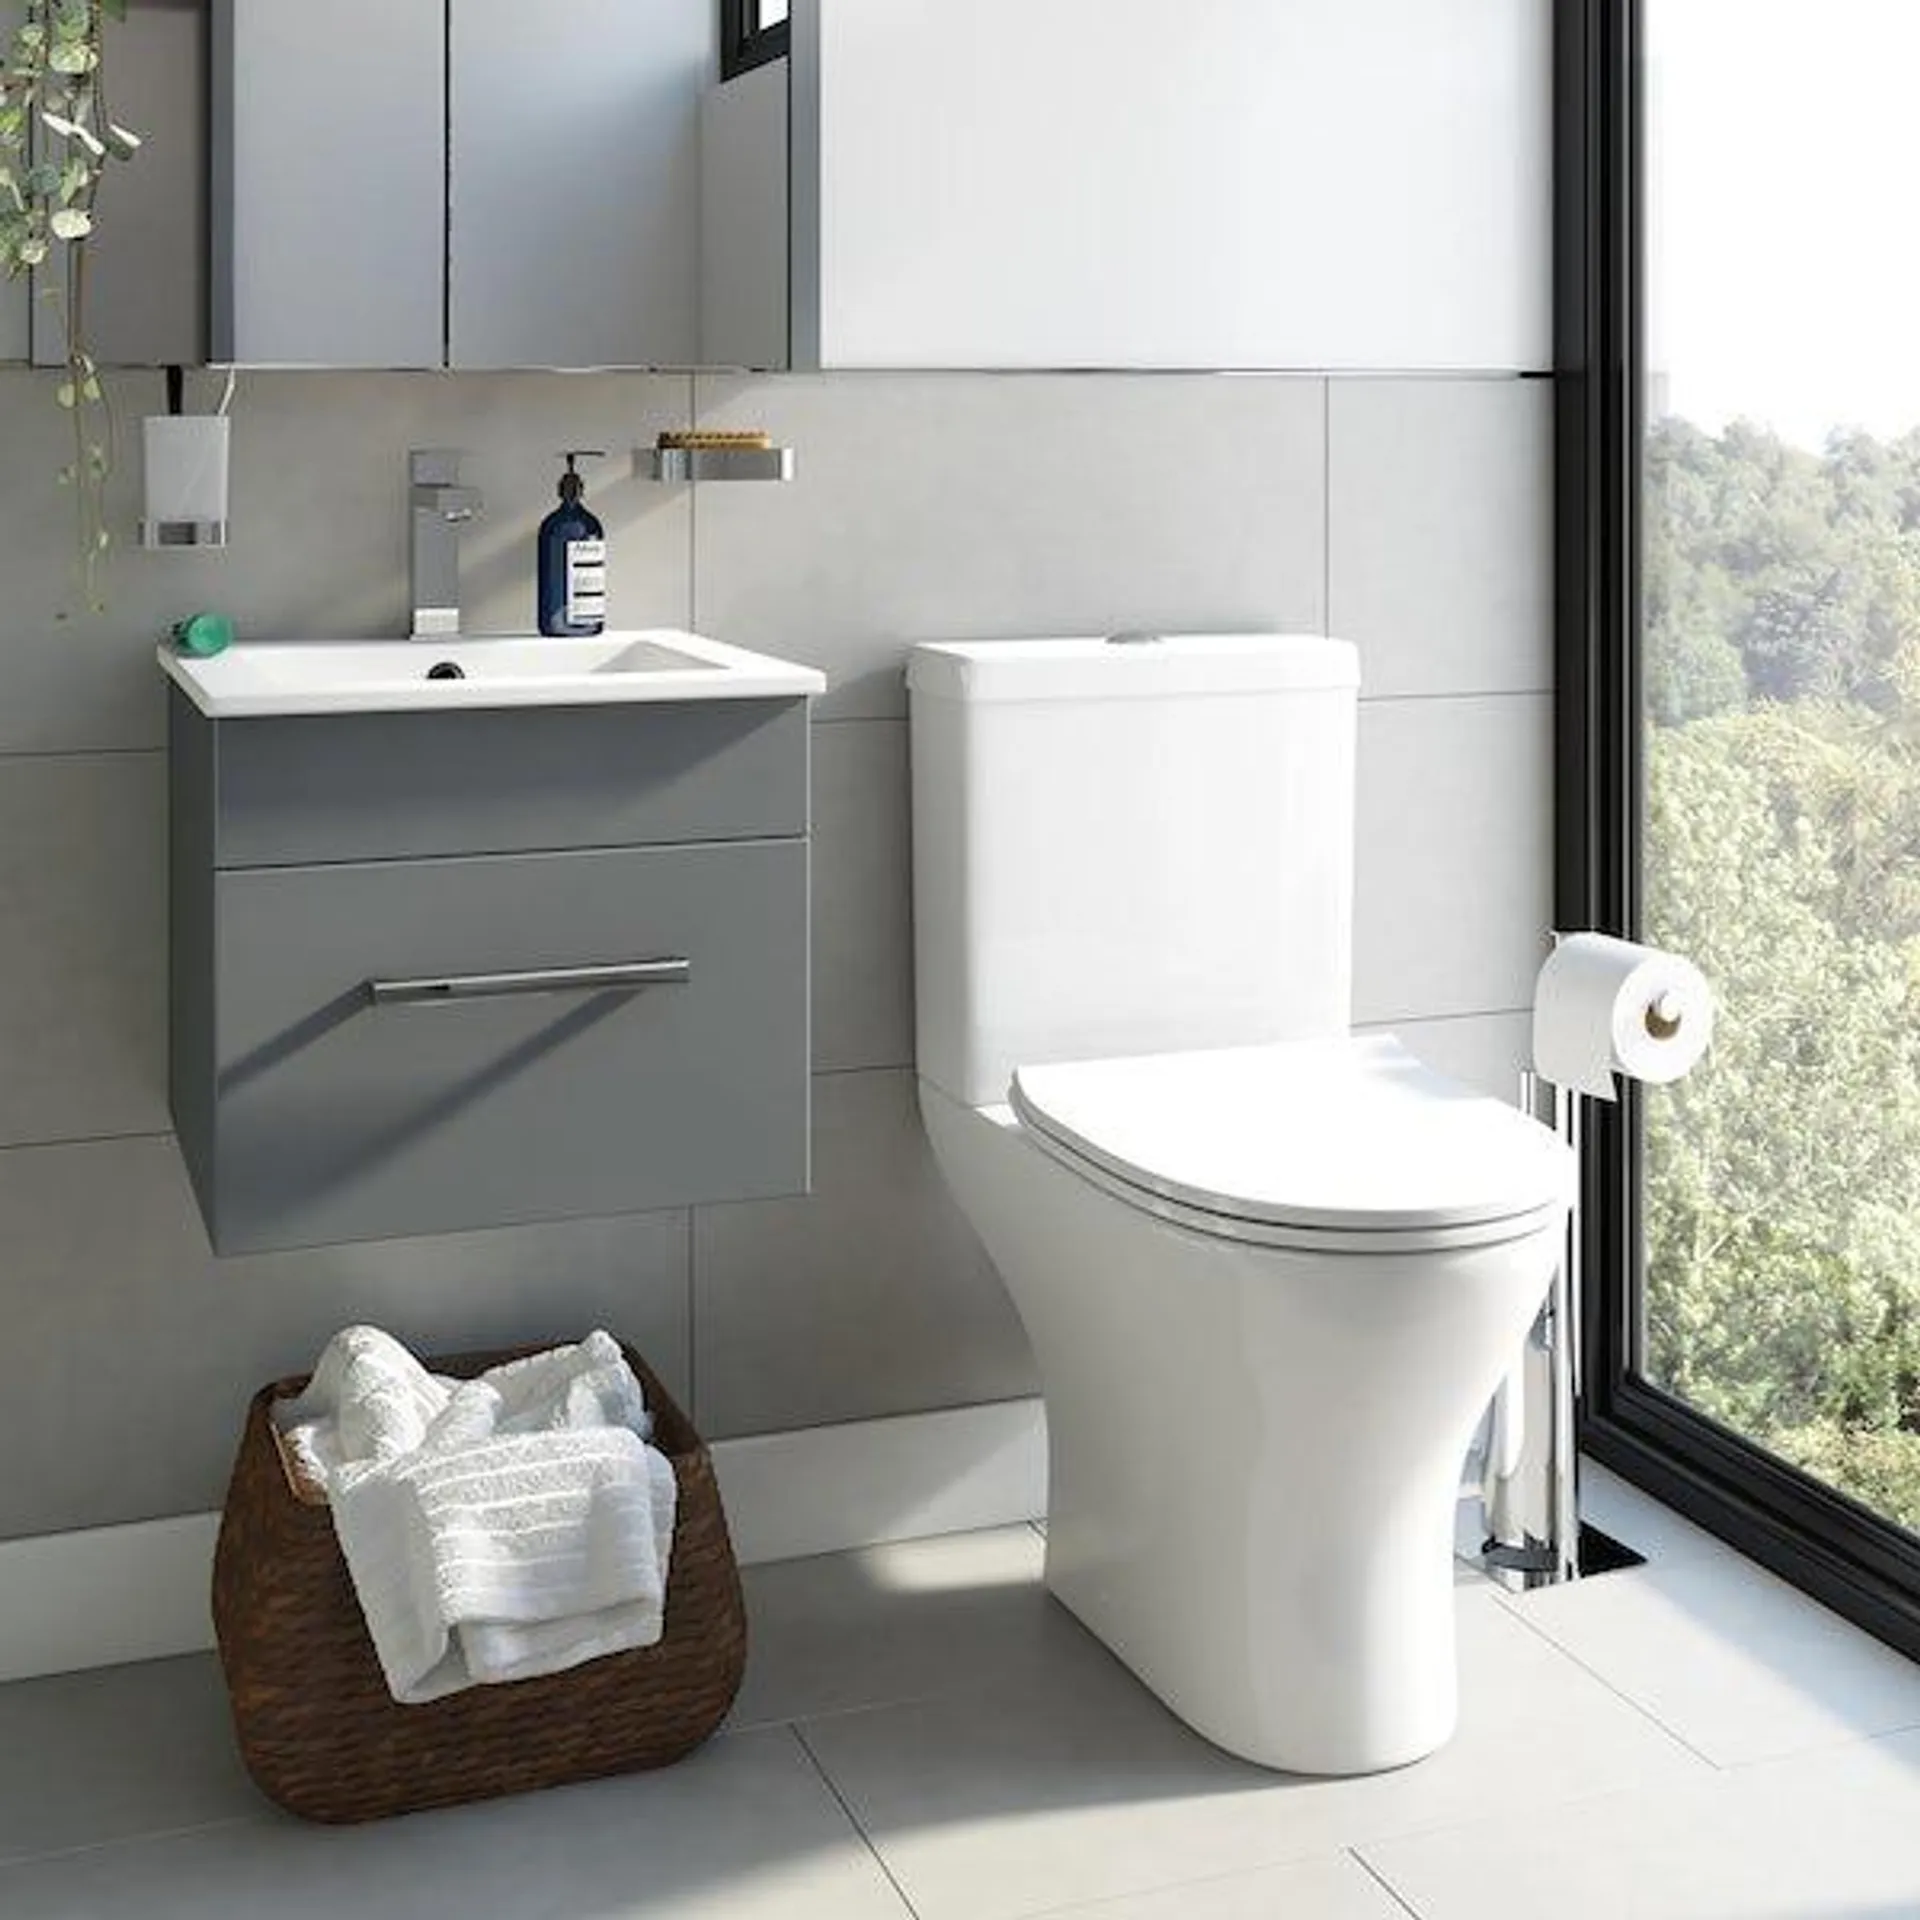 Orchard Derwent stone grey cloakroom suite with round close coupled toilet